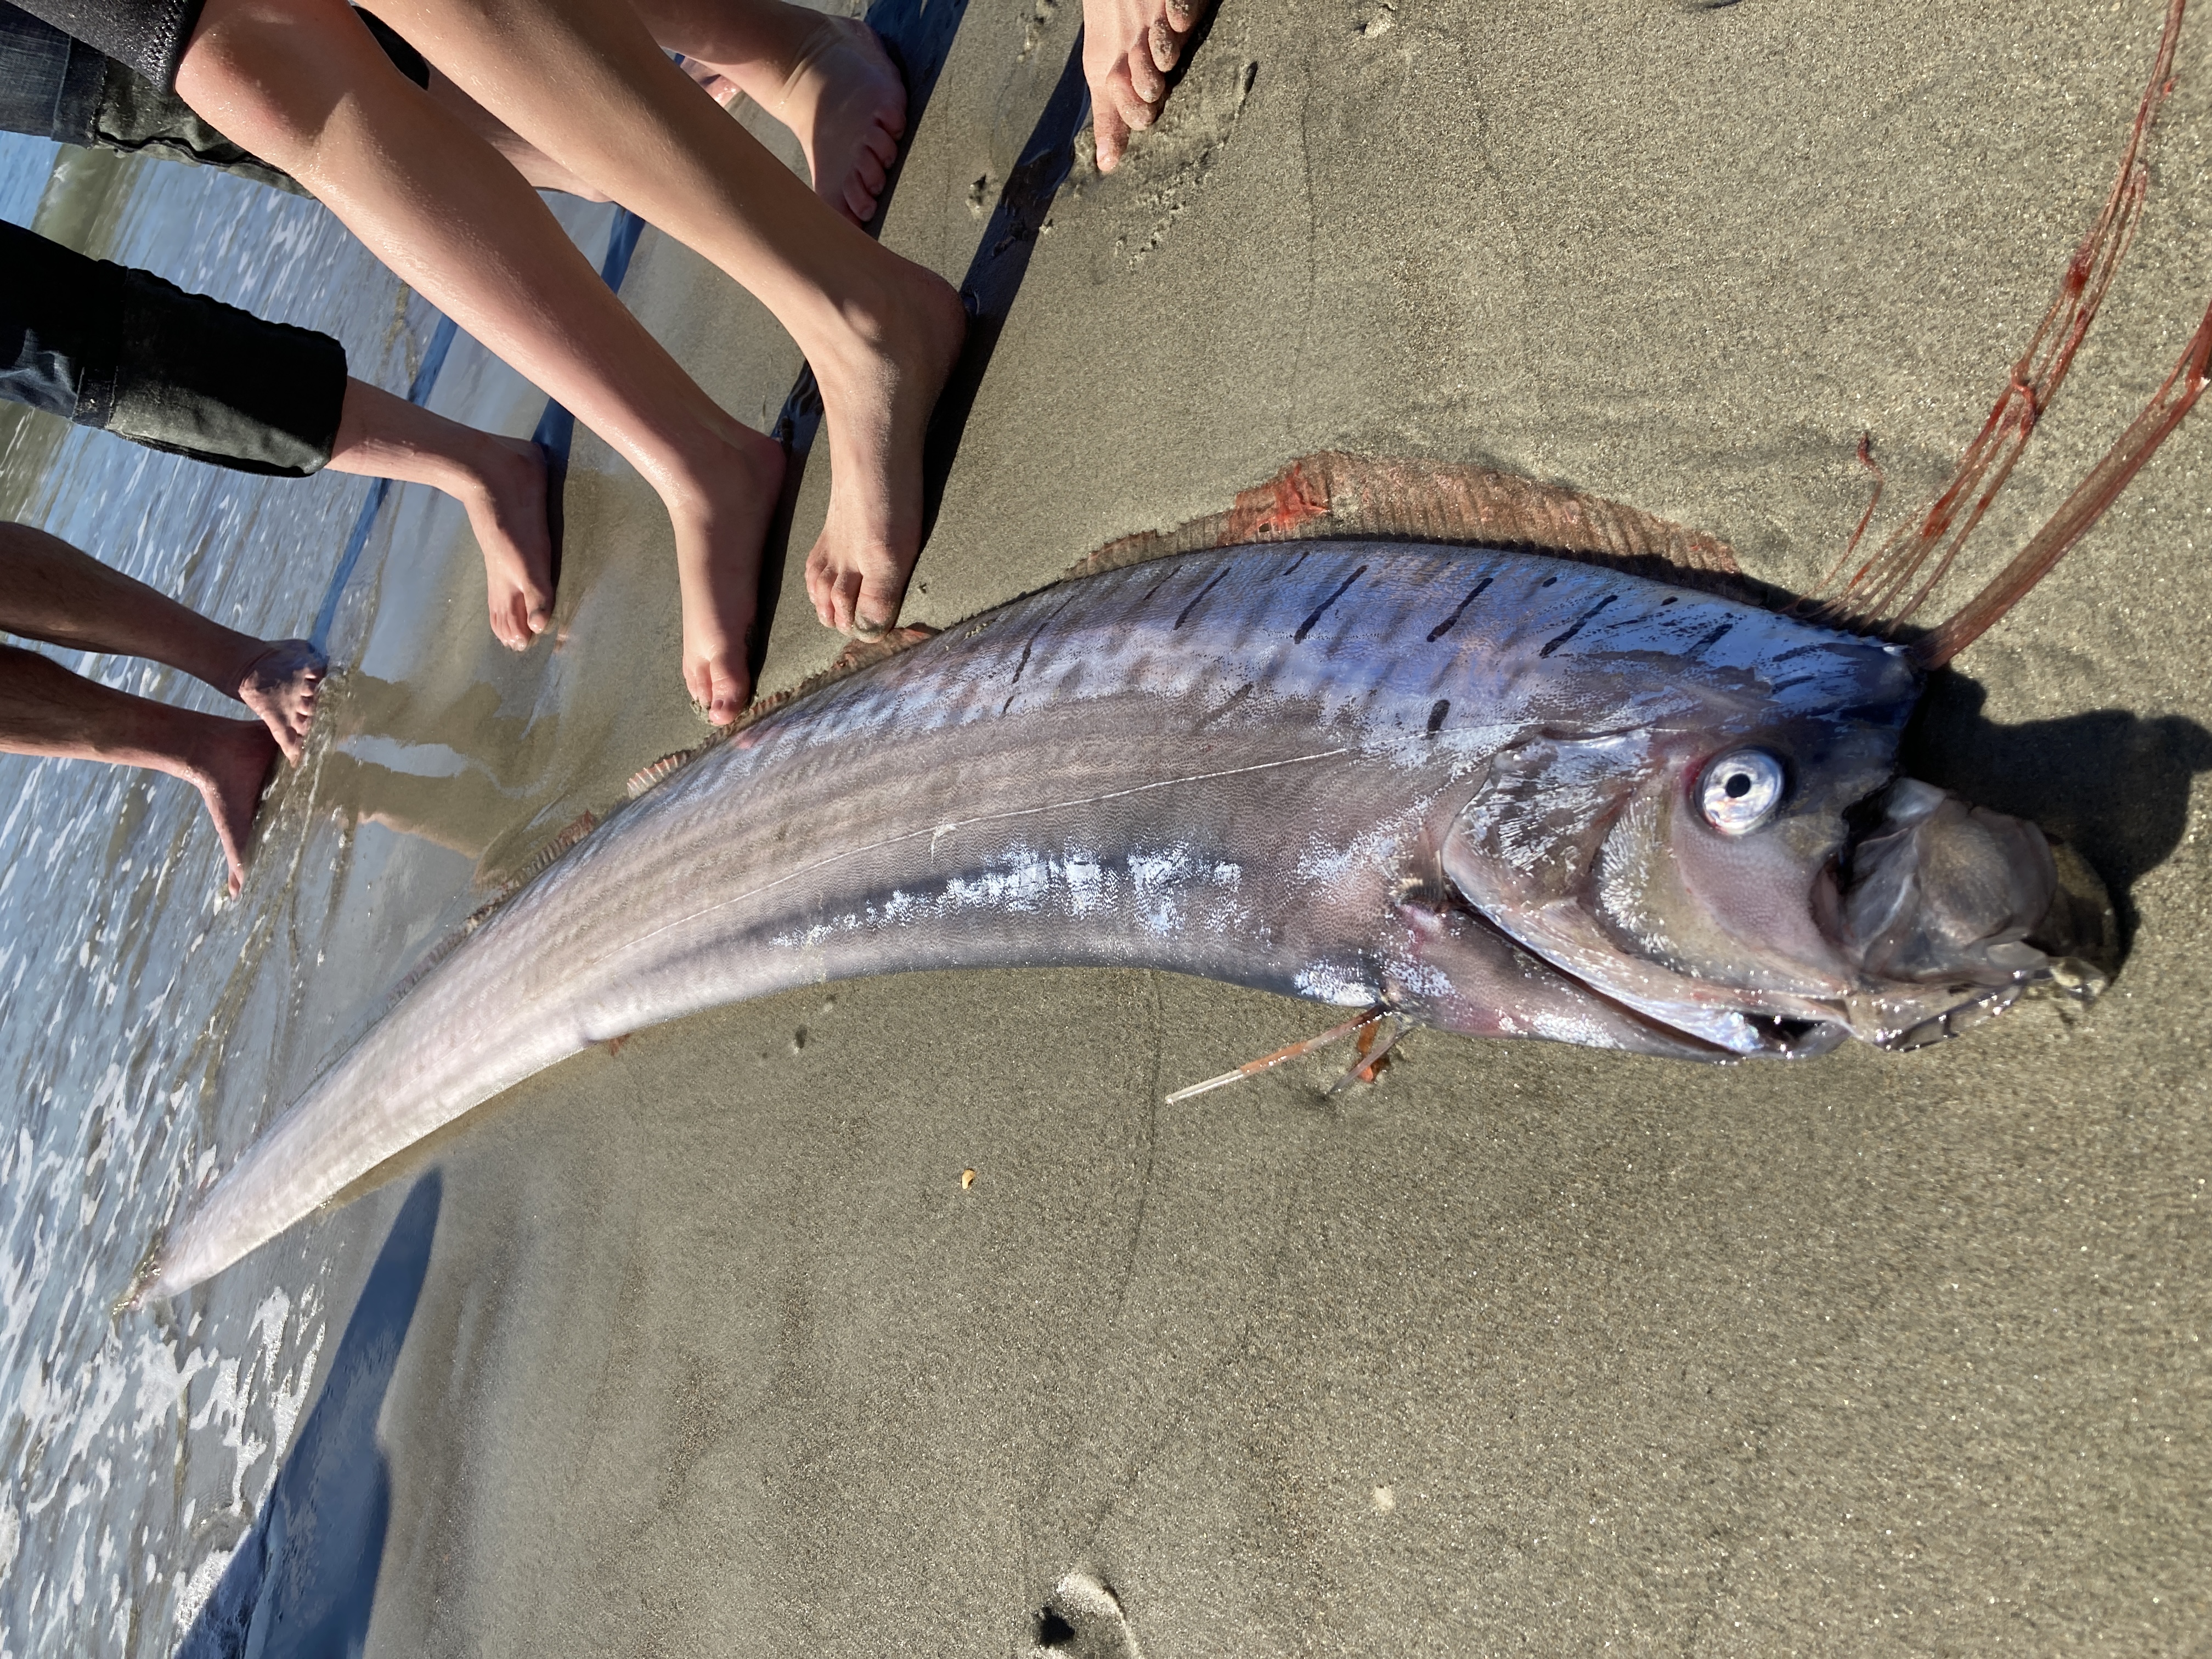 A juvenile serpent, otherwise known as a rarely-seen oarfish, washed up on the beach at Aramoana at the weekend. Photo: Bridie Allan